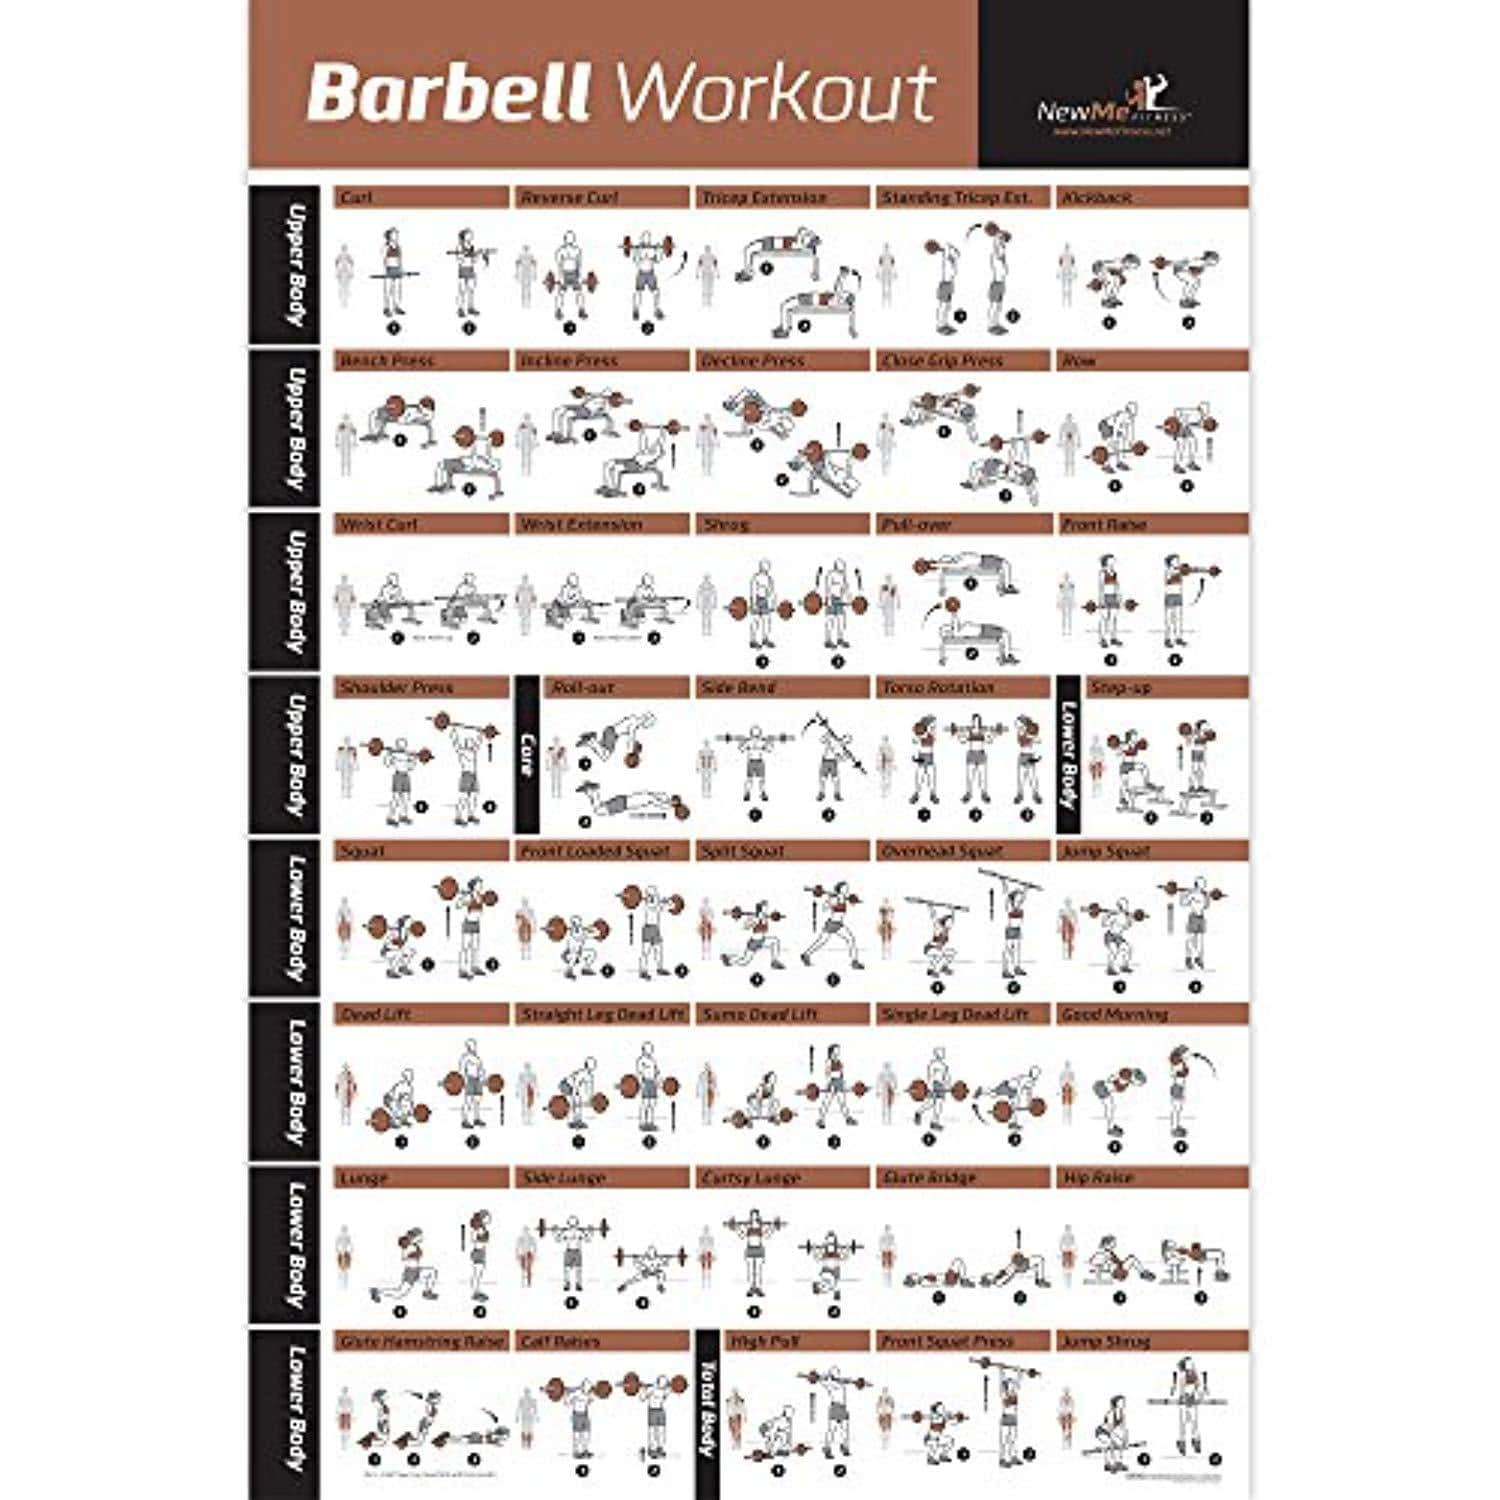 BARBELL WORKOUT EXERCISE POSTER LAMINATED Home Gym Weight Lifting